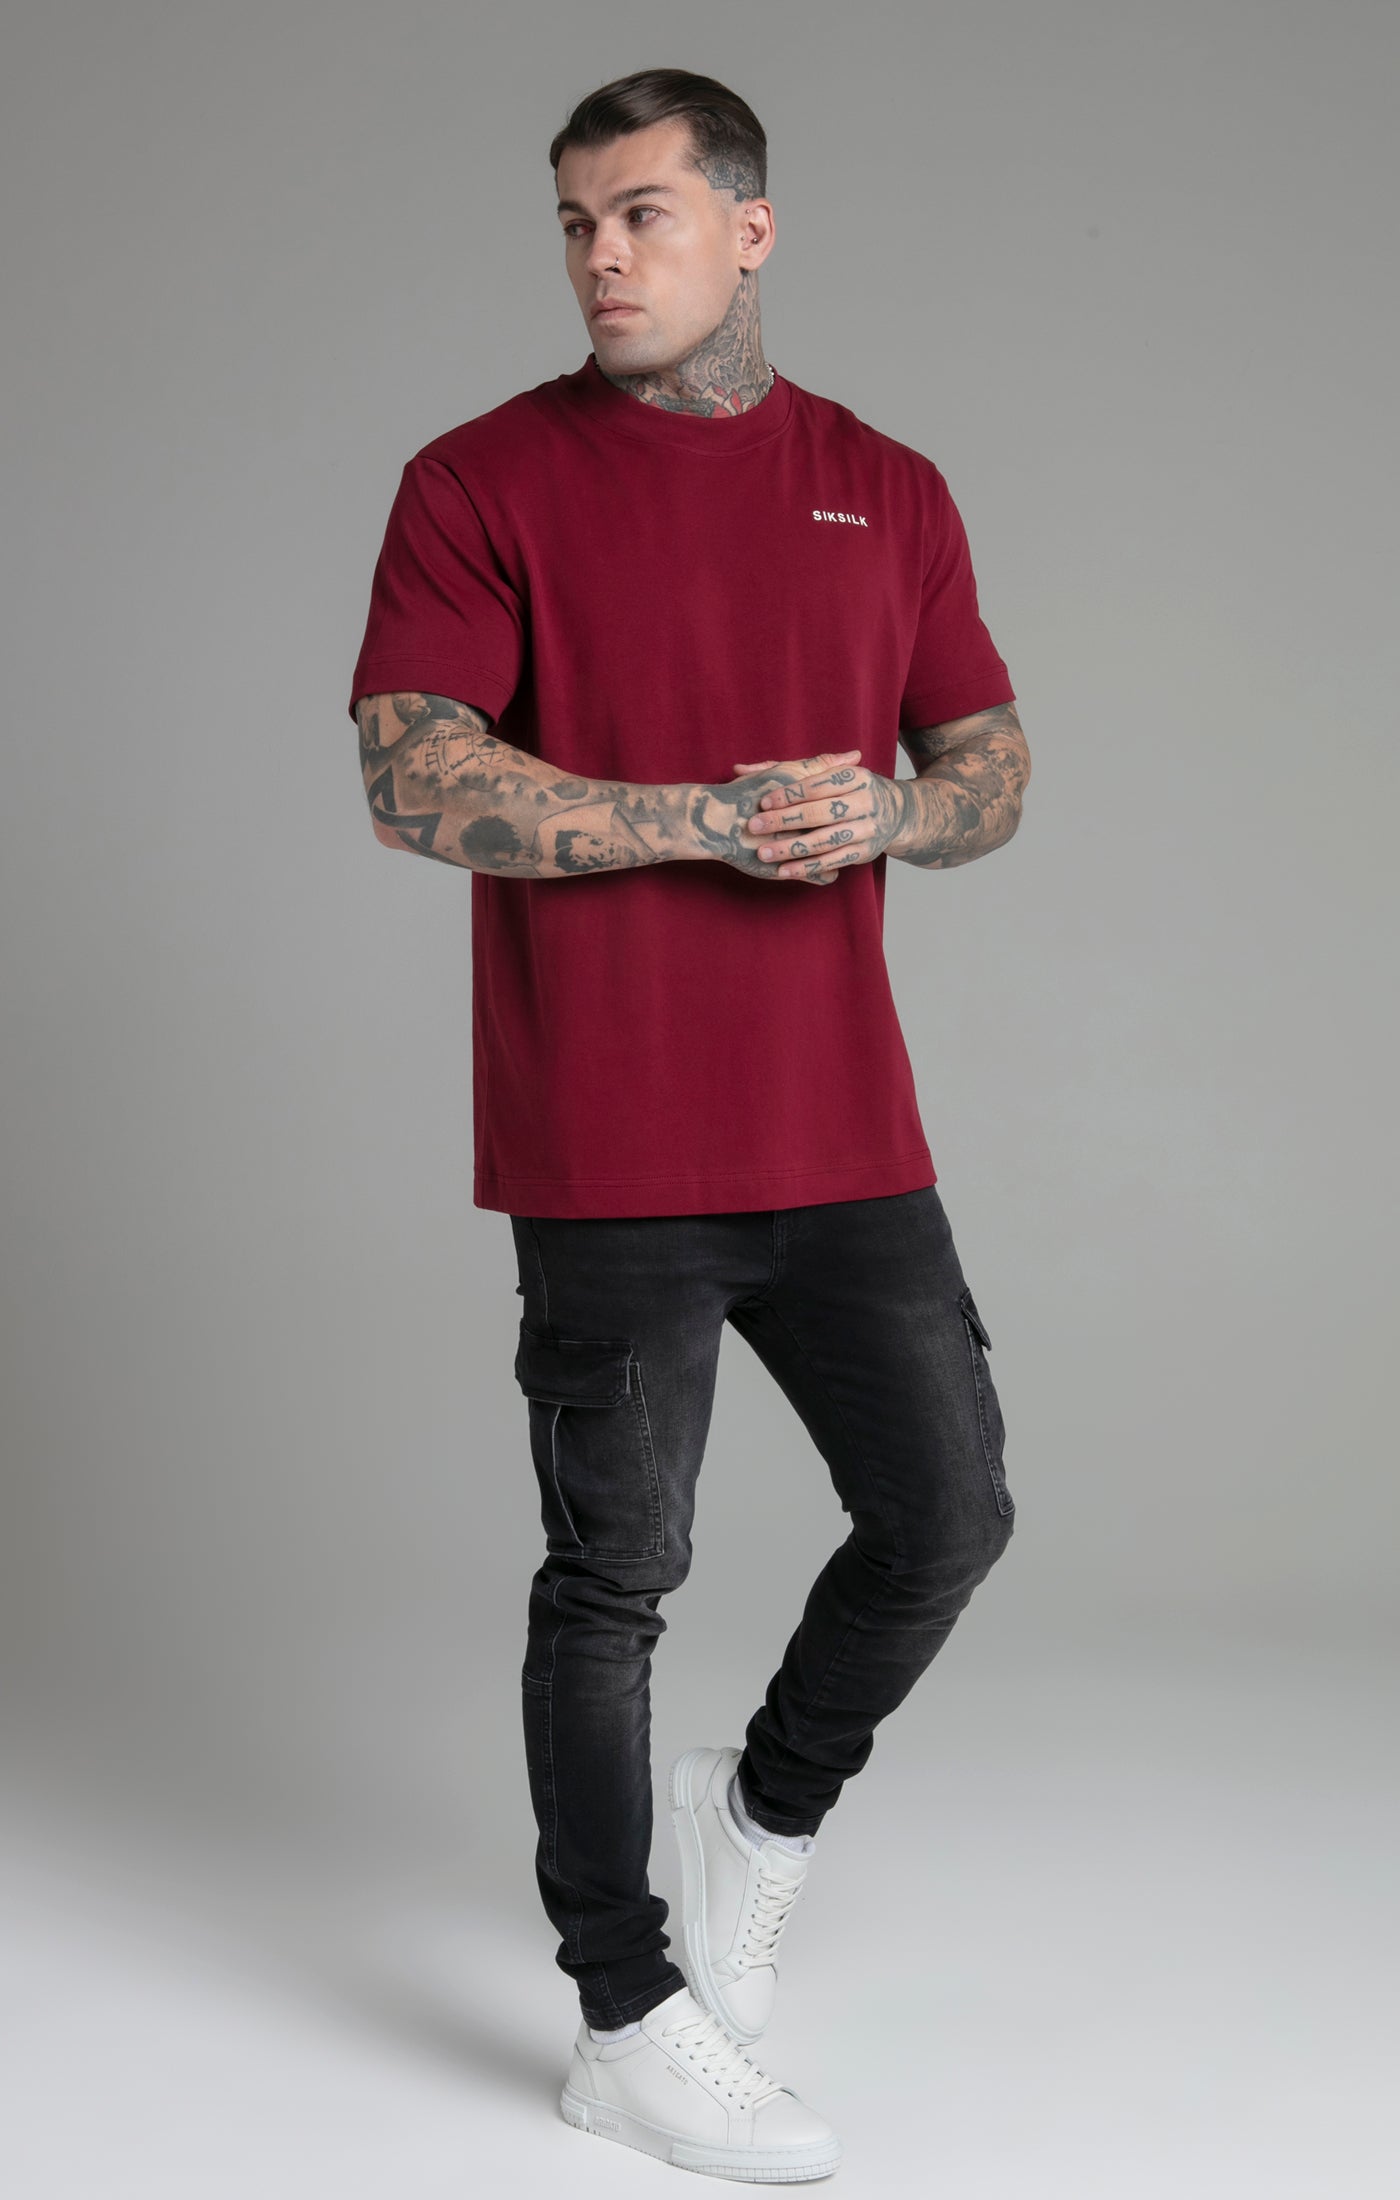 Limited Edition T-Shirt in Burgundy T-Shirts SikSilk   